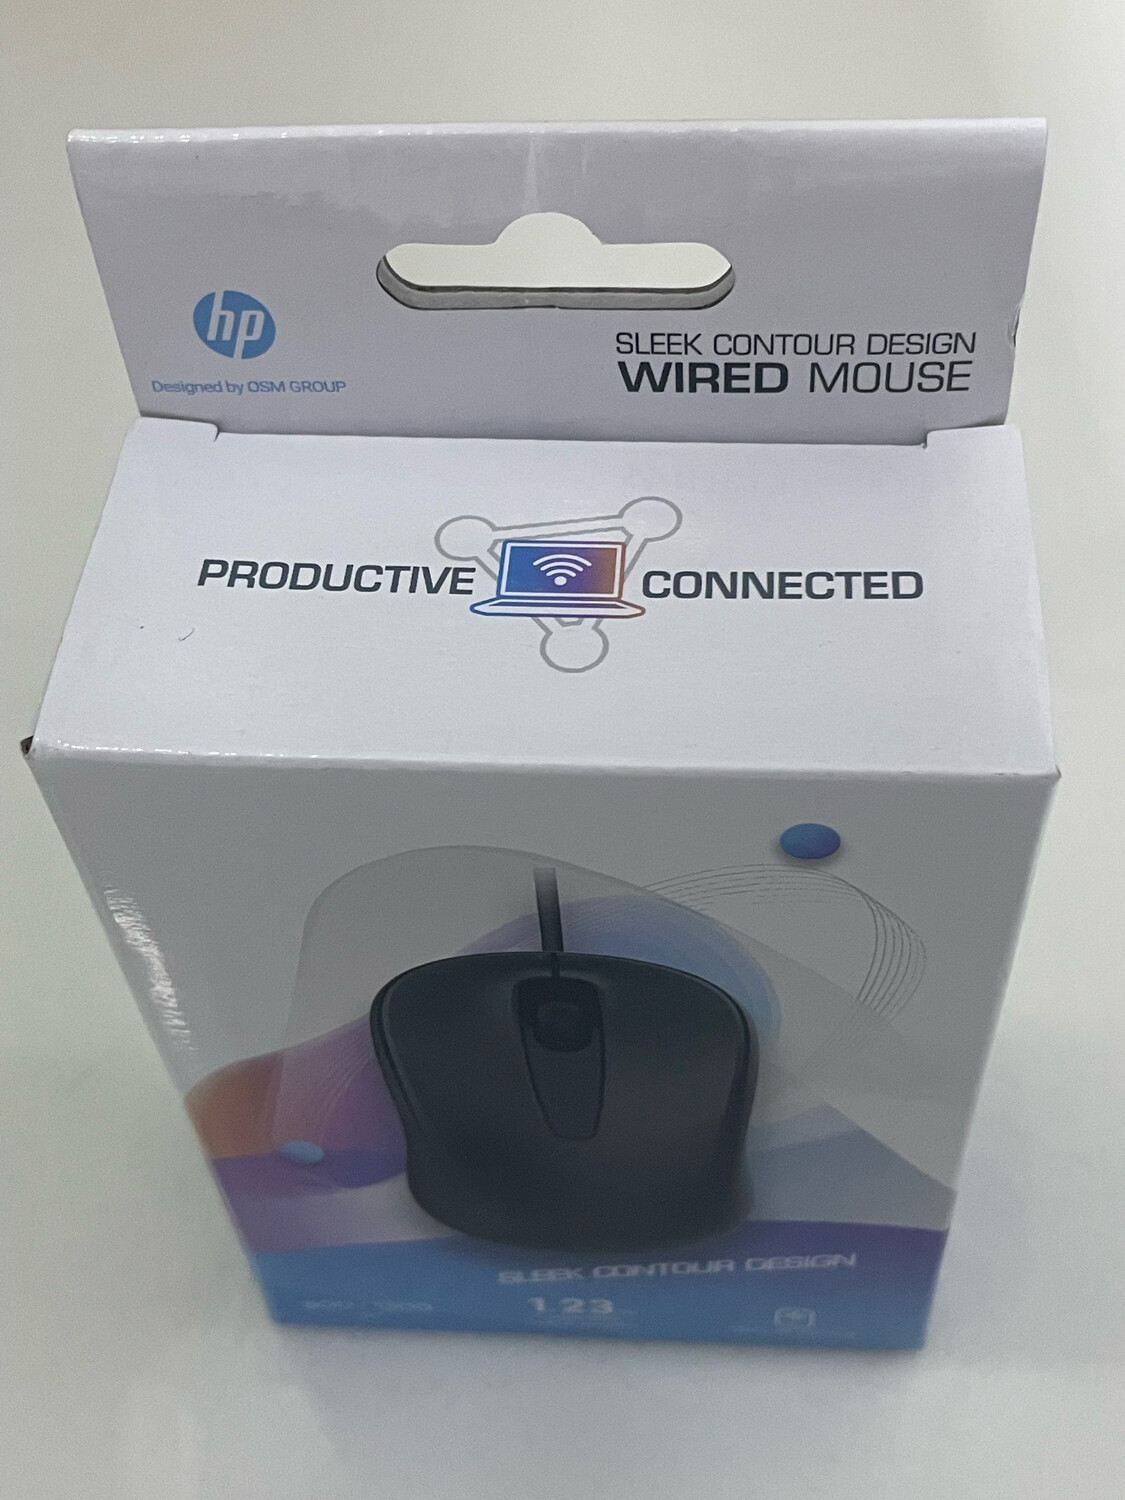 HP M006 Wired USB Optical Mouse